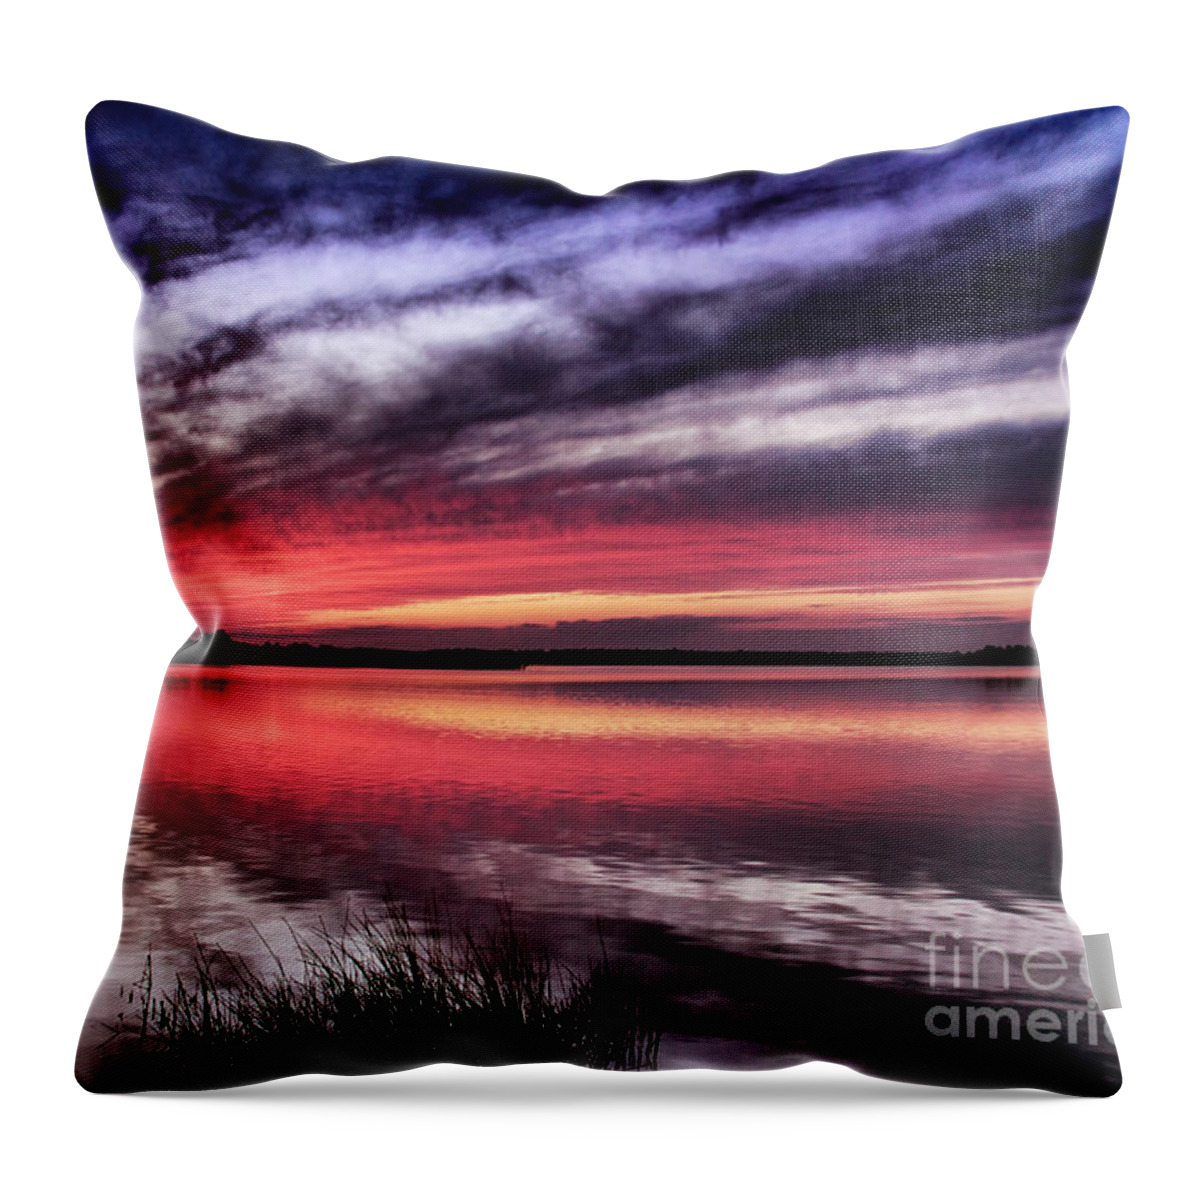 Sunset Print Throw Pillow featuring the photograph Sunset Reflections by Phil Mancuso